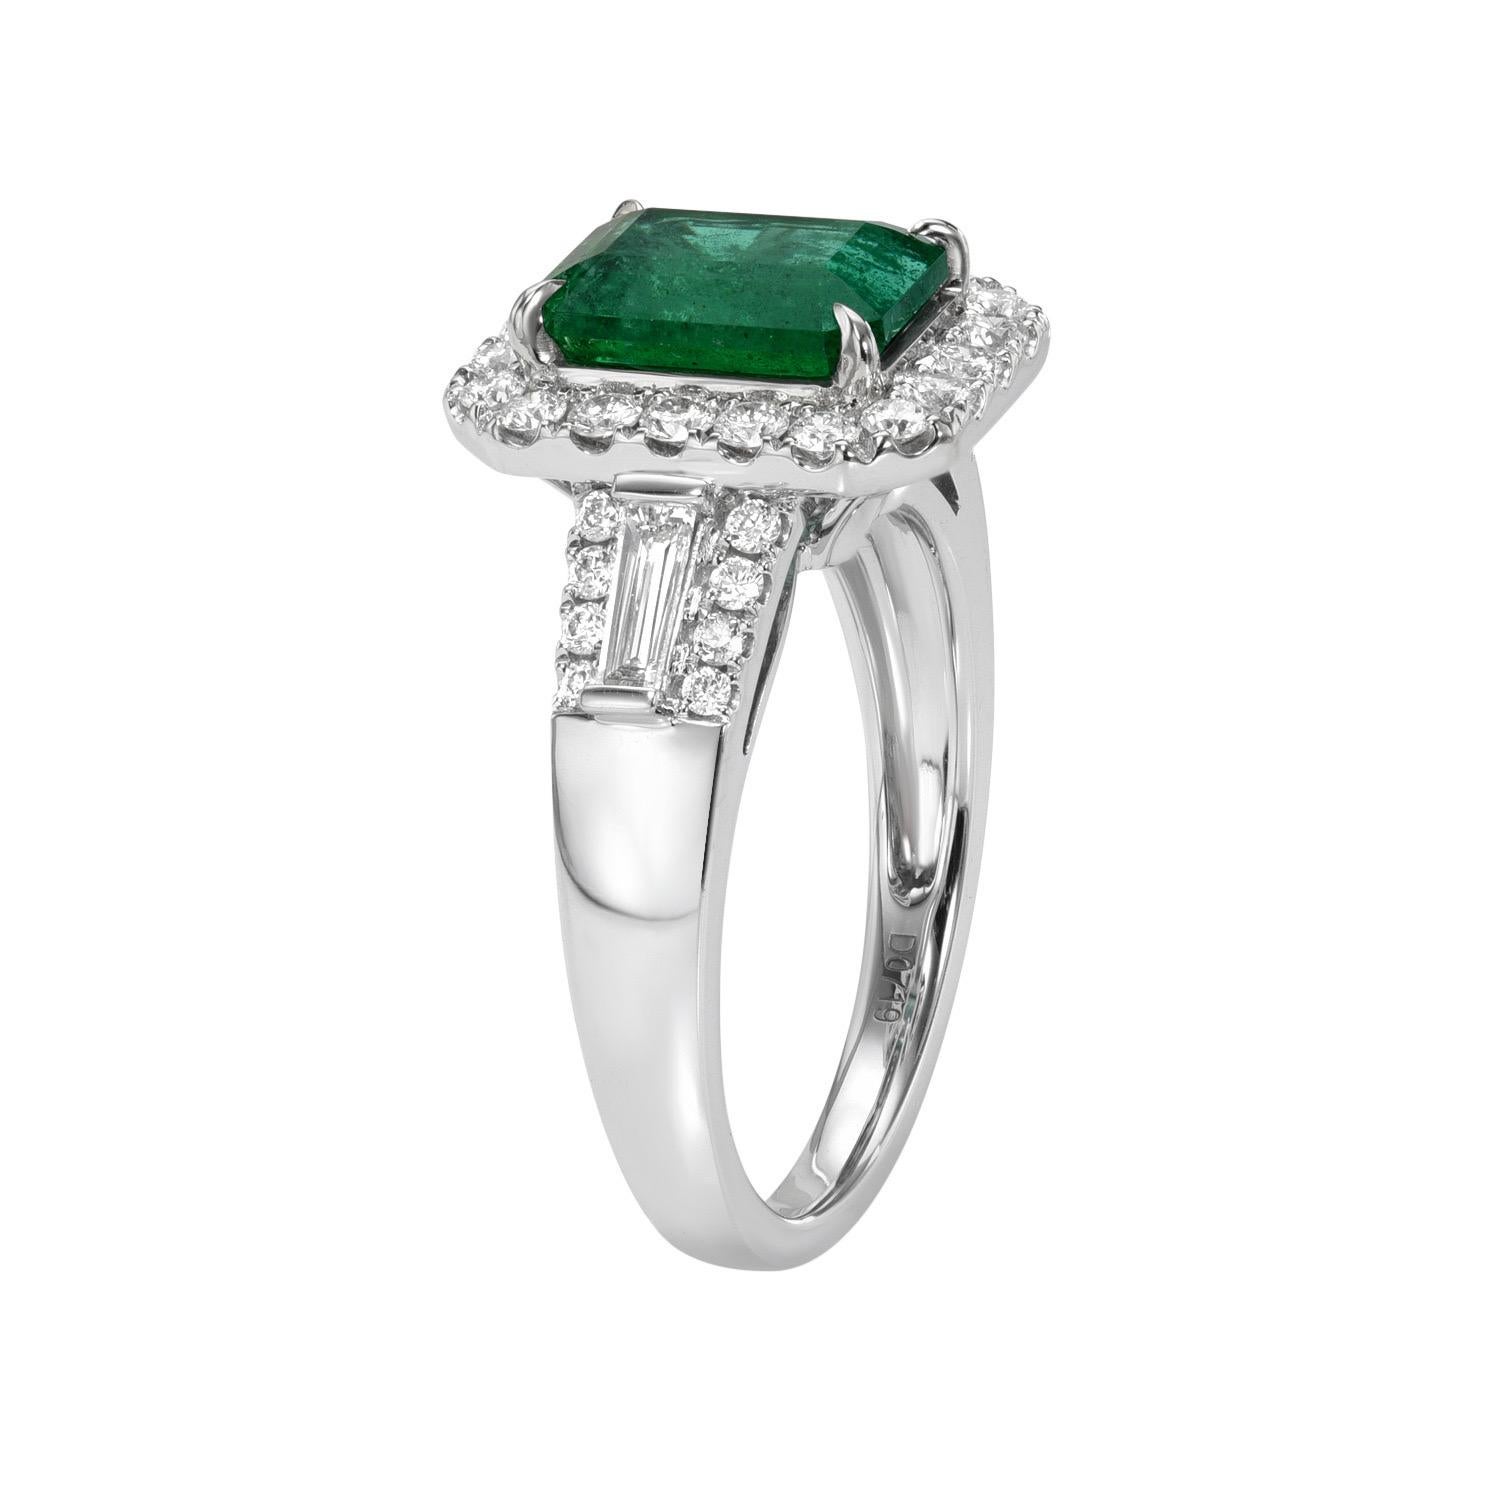 2.16 carat Emerald Cut Emerald, 18K white gold ring, decorated with round brilliant and baguette diamonds, F-G/VS, totaling 0.72 carats.
Ring size 6.5. Resizing is complementary upon request.
Returns are accepted and paid by us within 7 days of